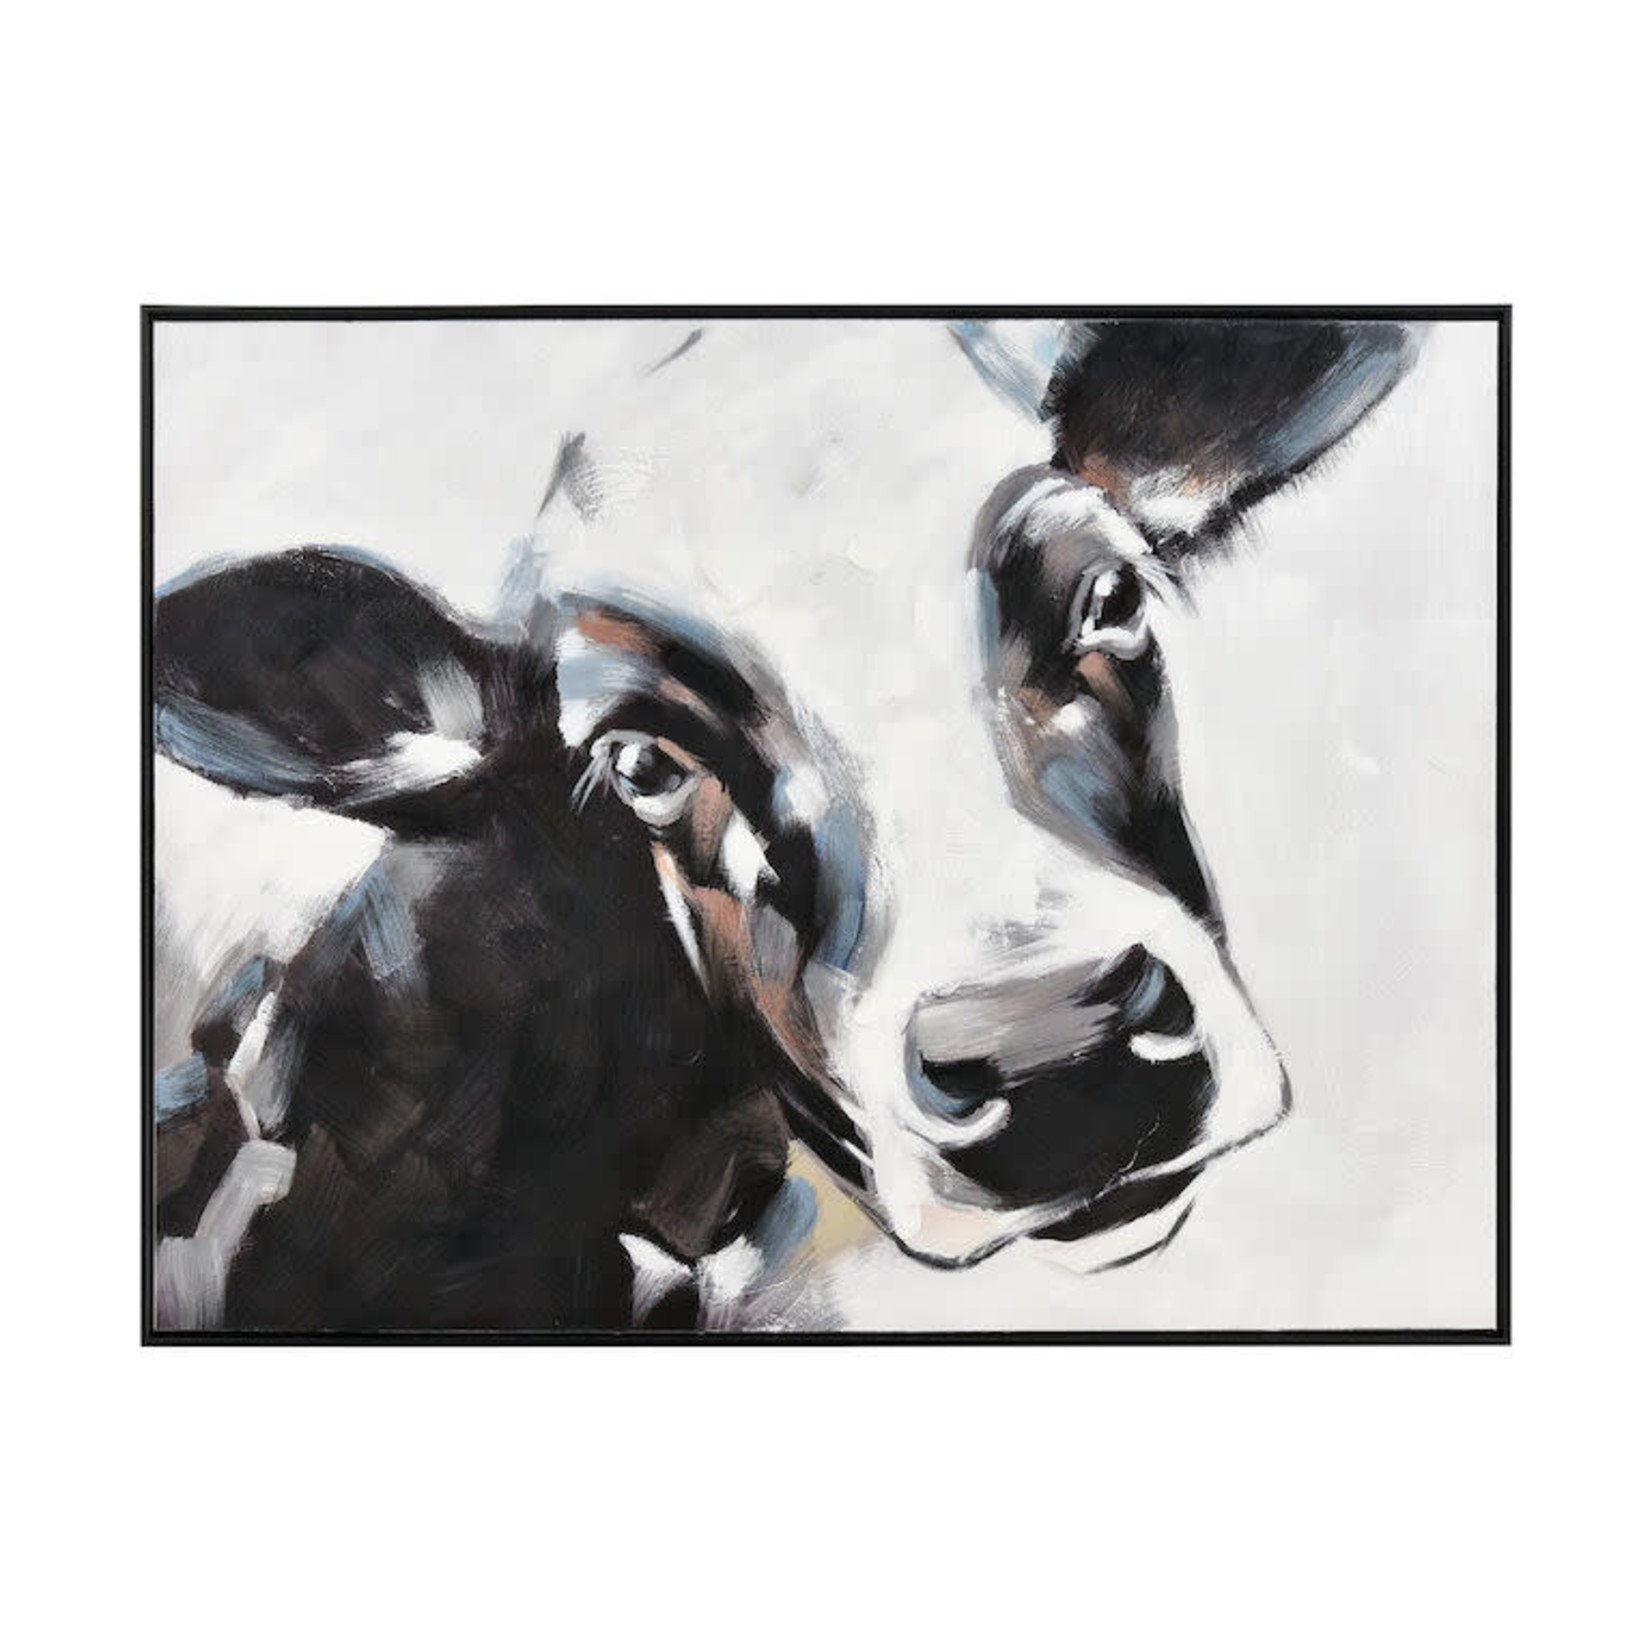 ELK HOME LUCY THE COW FRAMED WALL ART